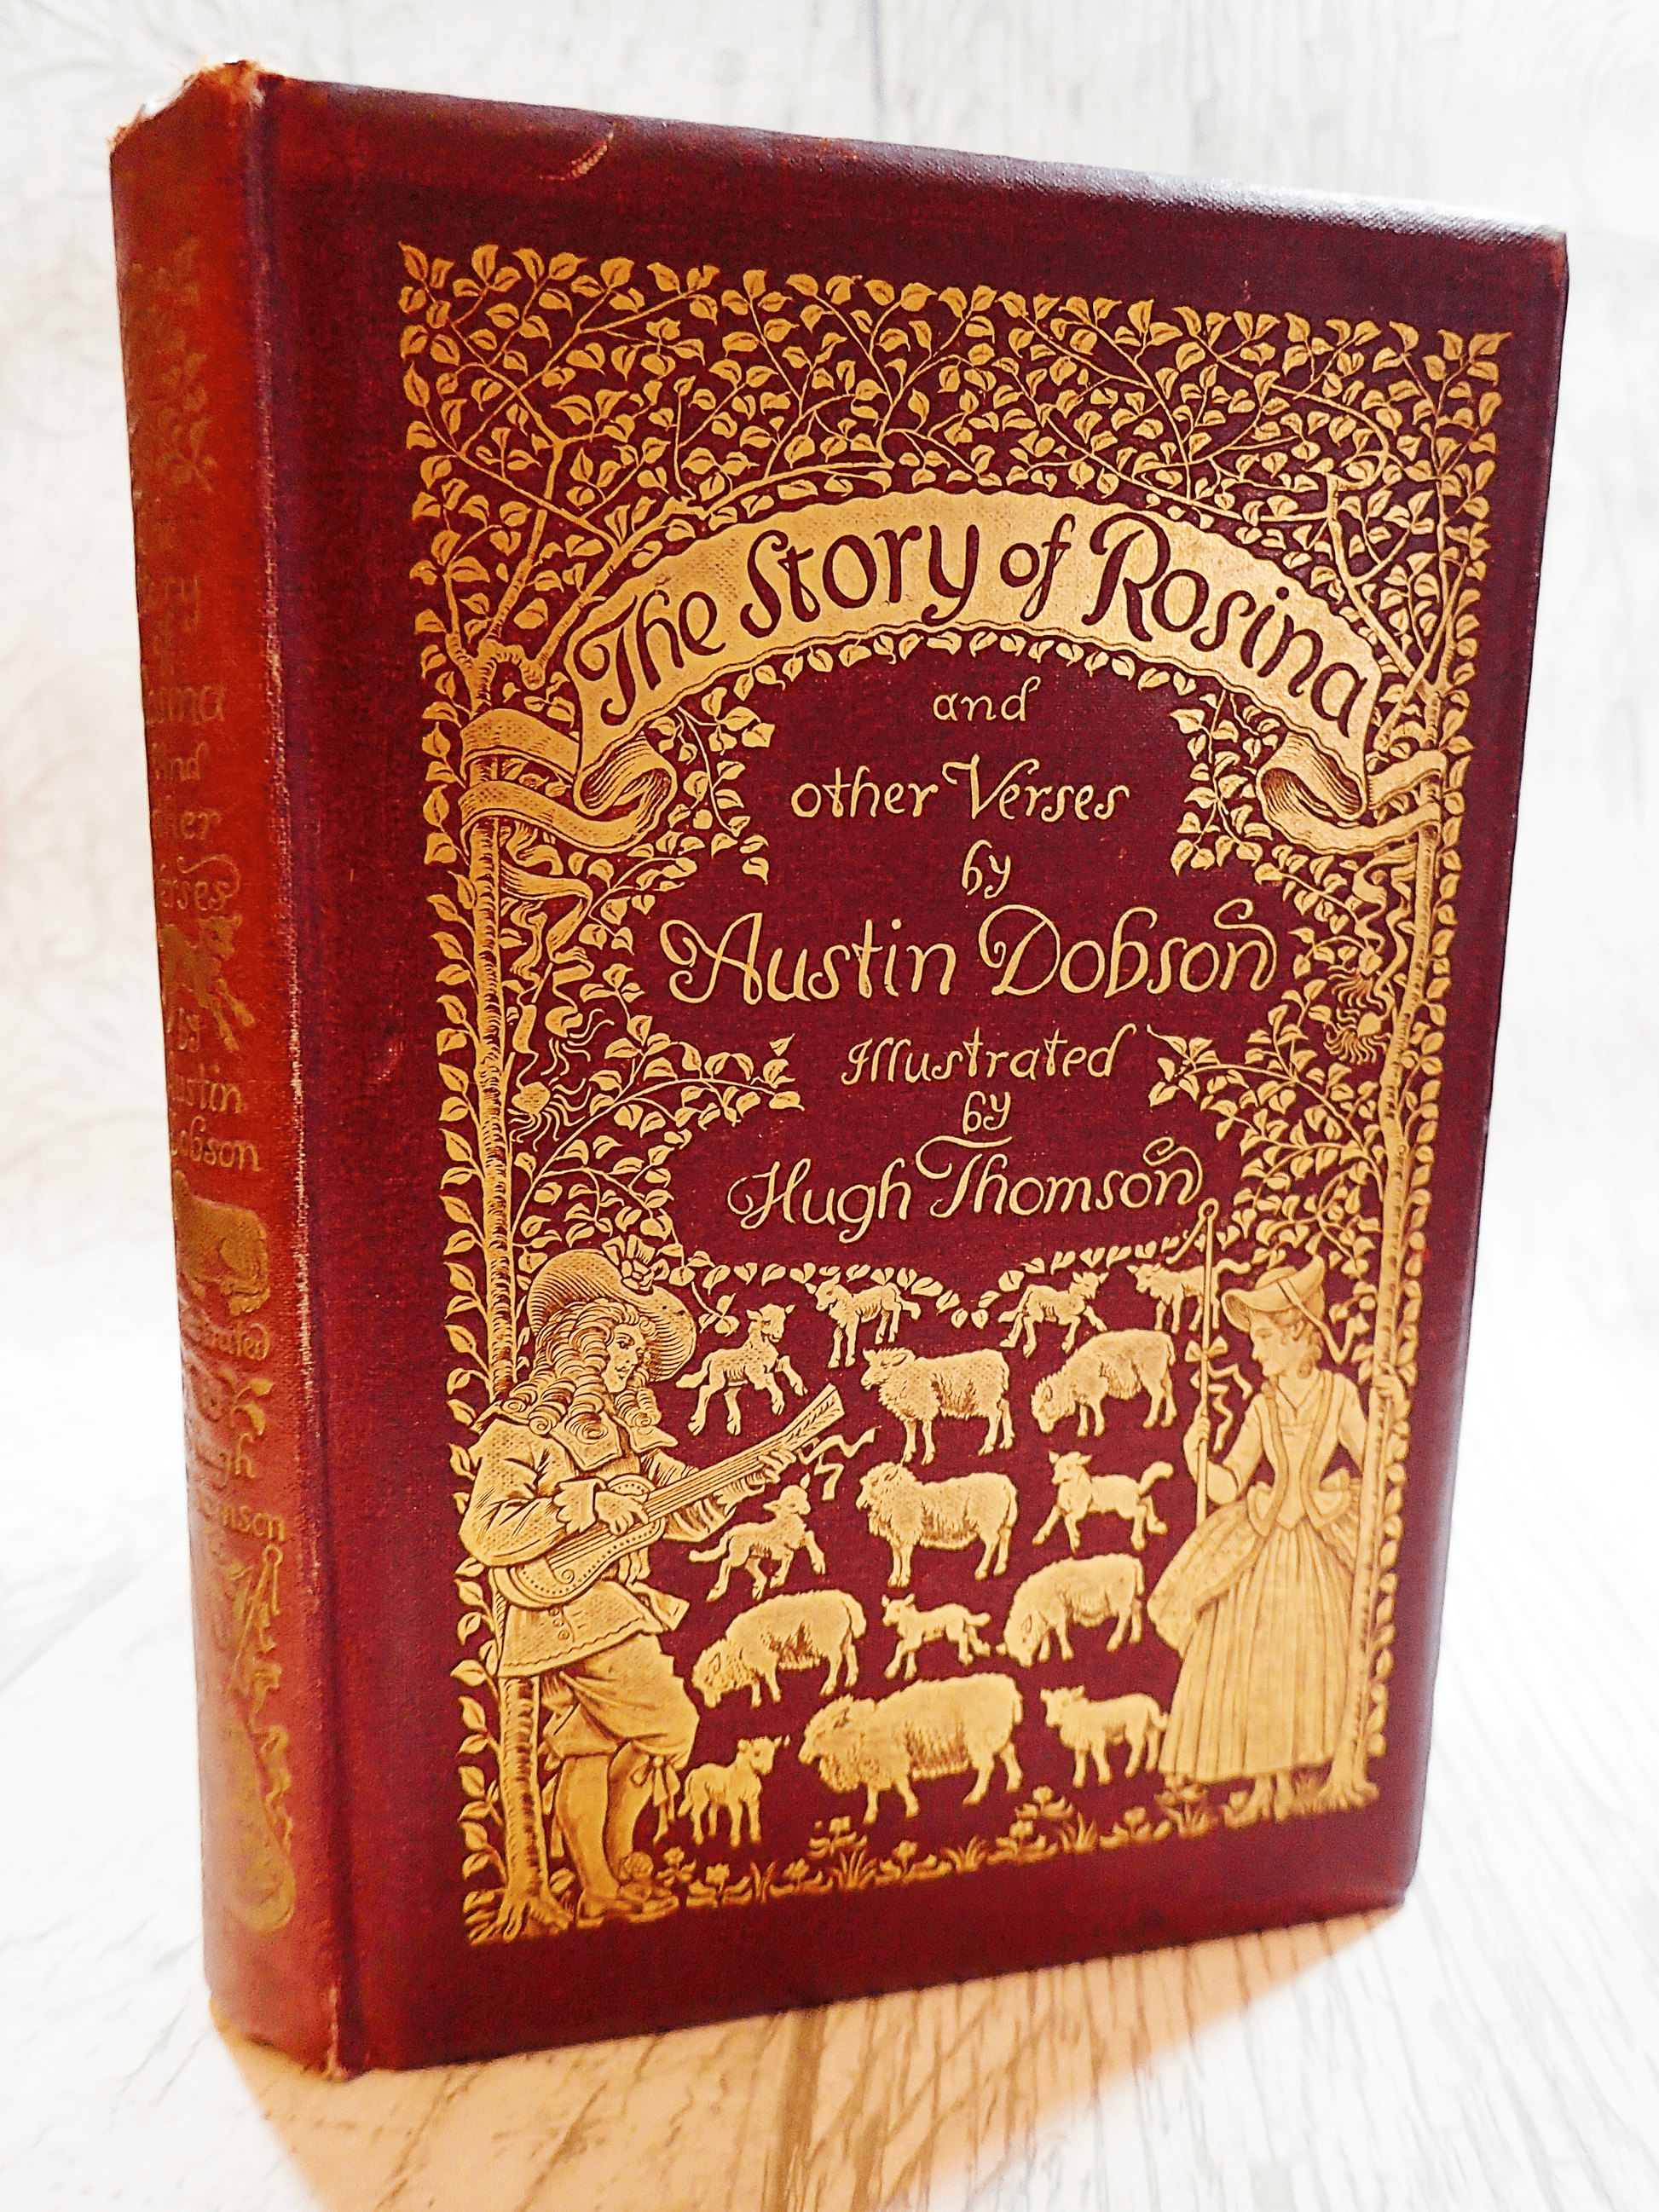 Ornate gilt embossed front cover of The Story of Rosina Austin Dobson illus Hugh Thompson First Edition Antique Book. Showing a french shepherdess with a lute player. Against a light background. 